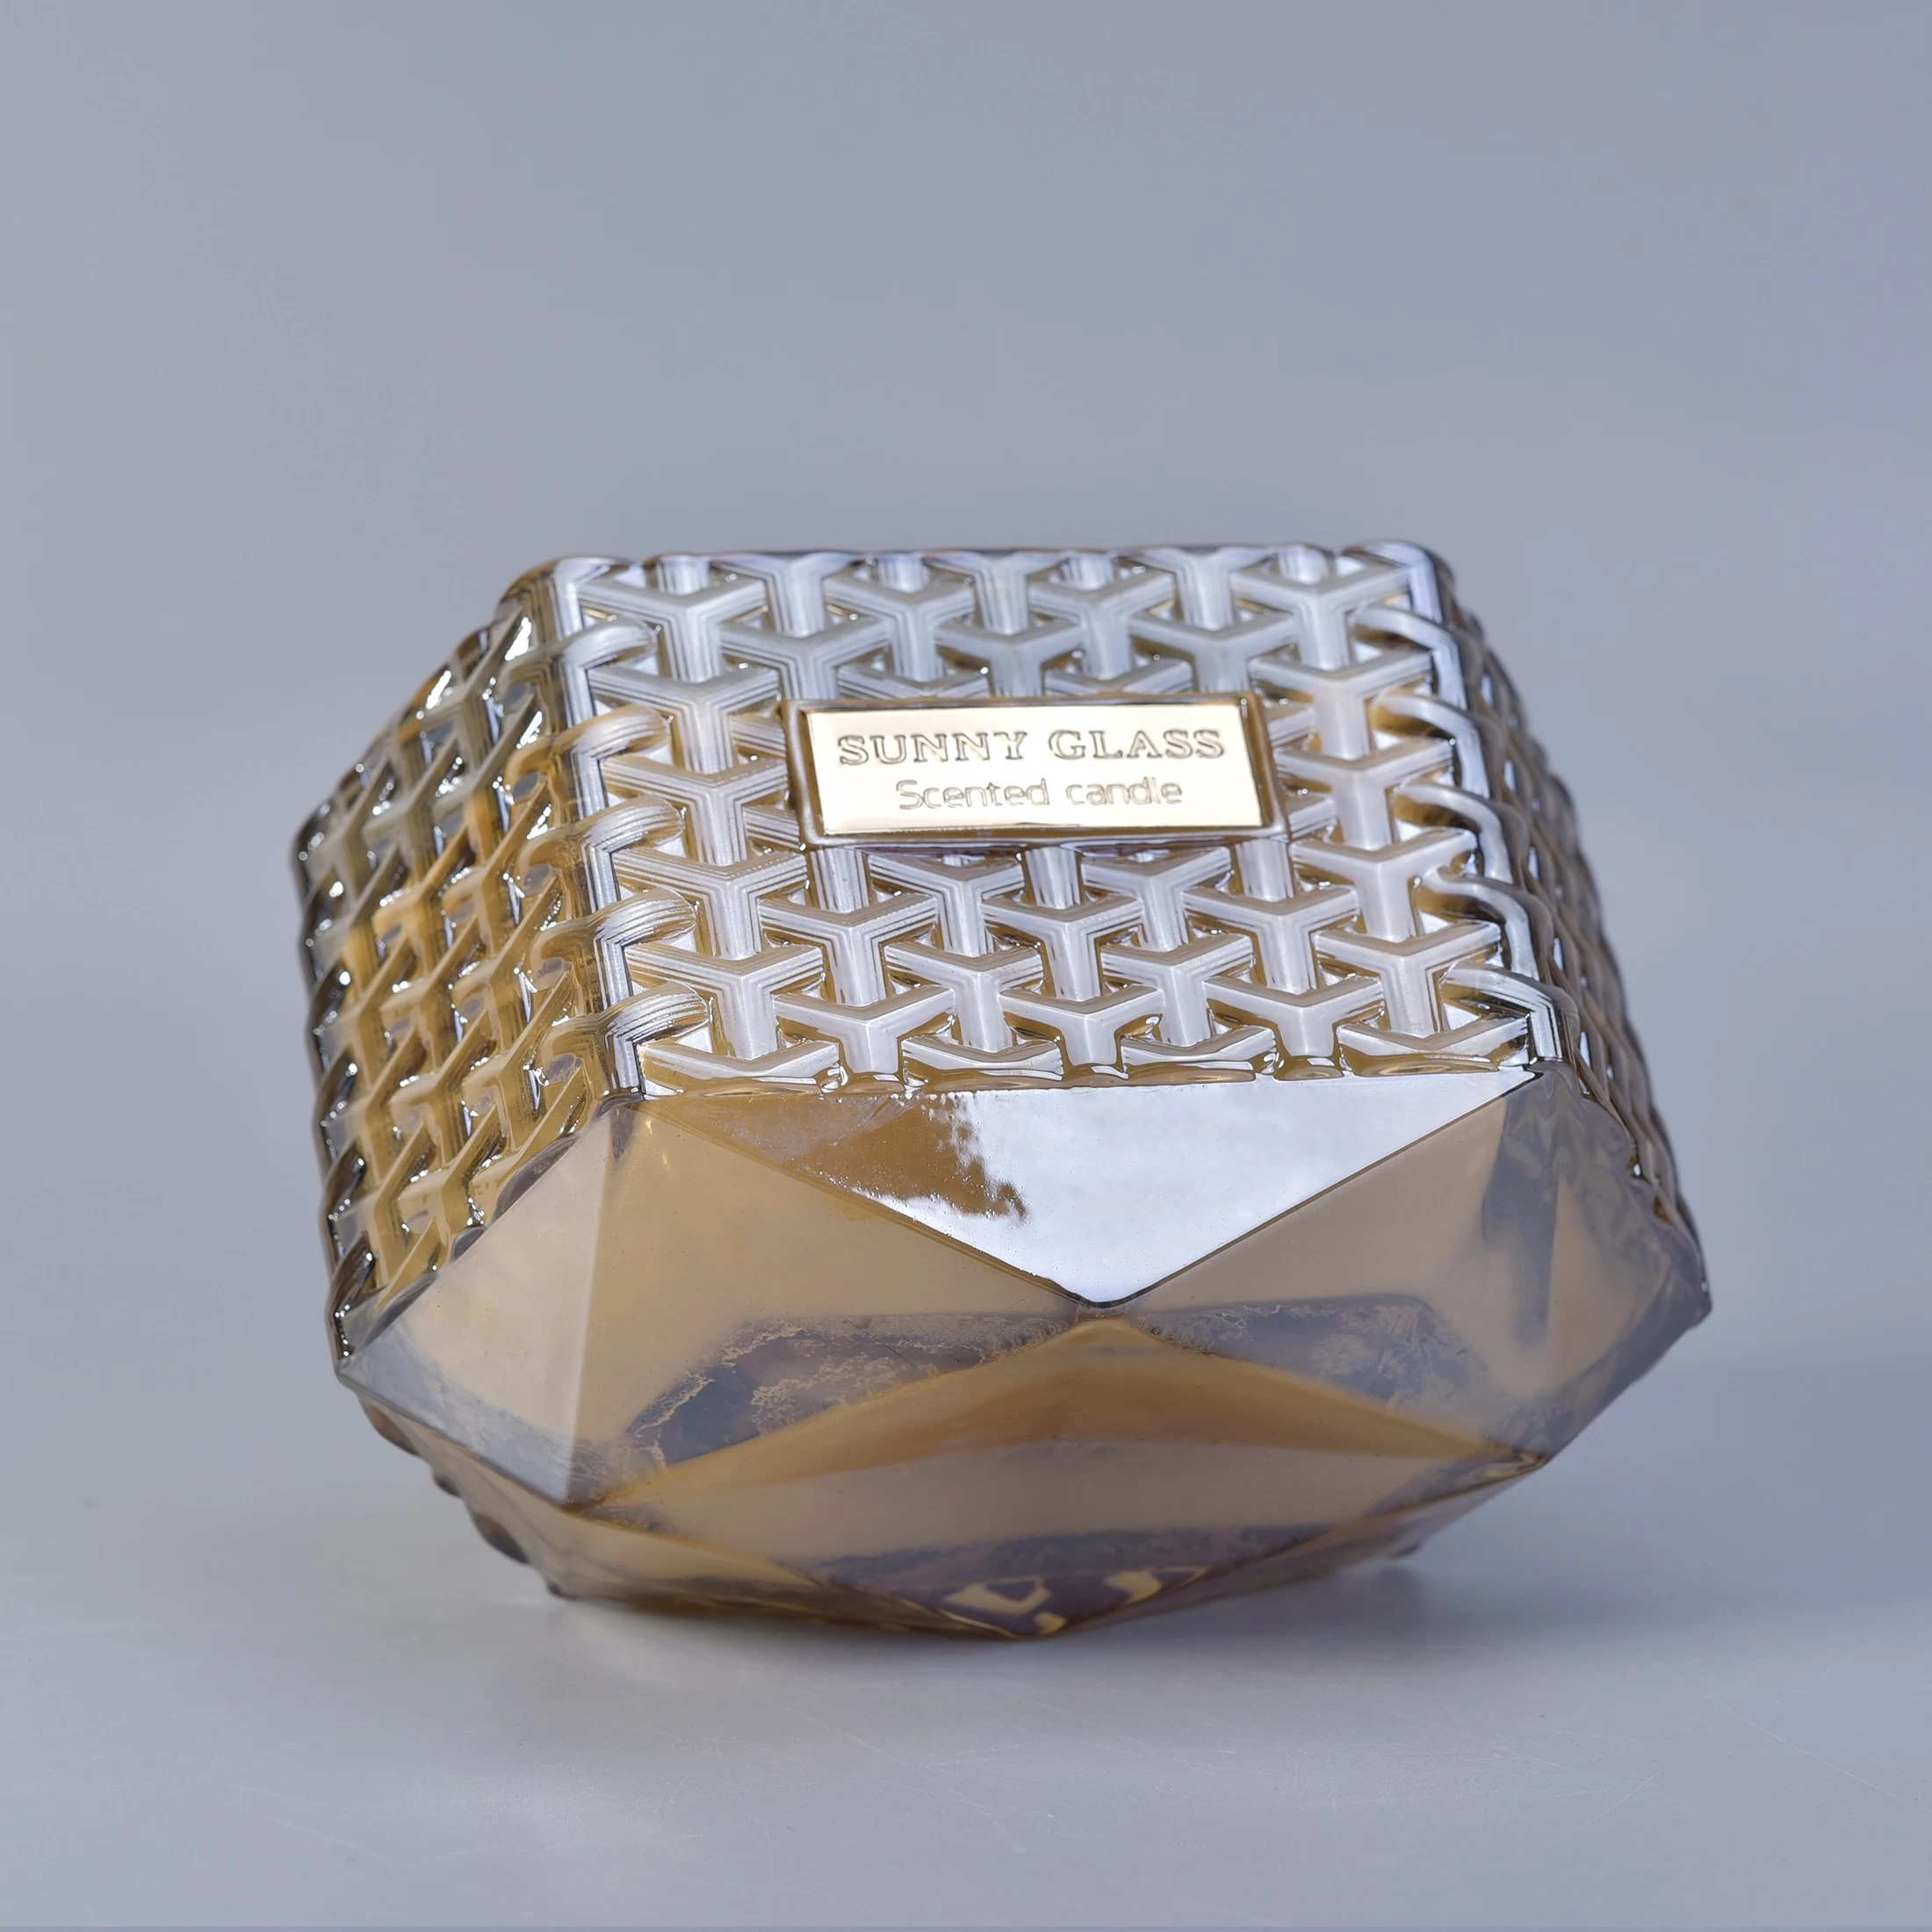 8oz 10oz luxury decorative gold woven glass candle jar with wood lid